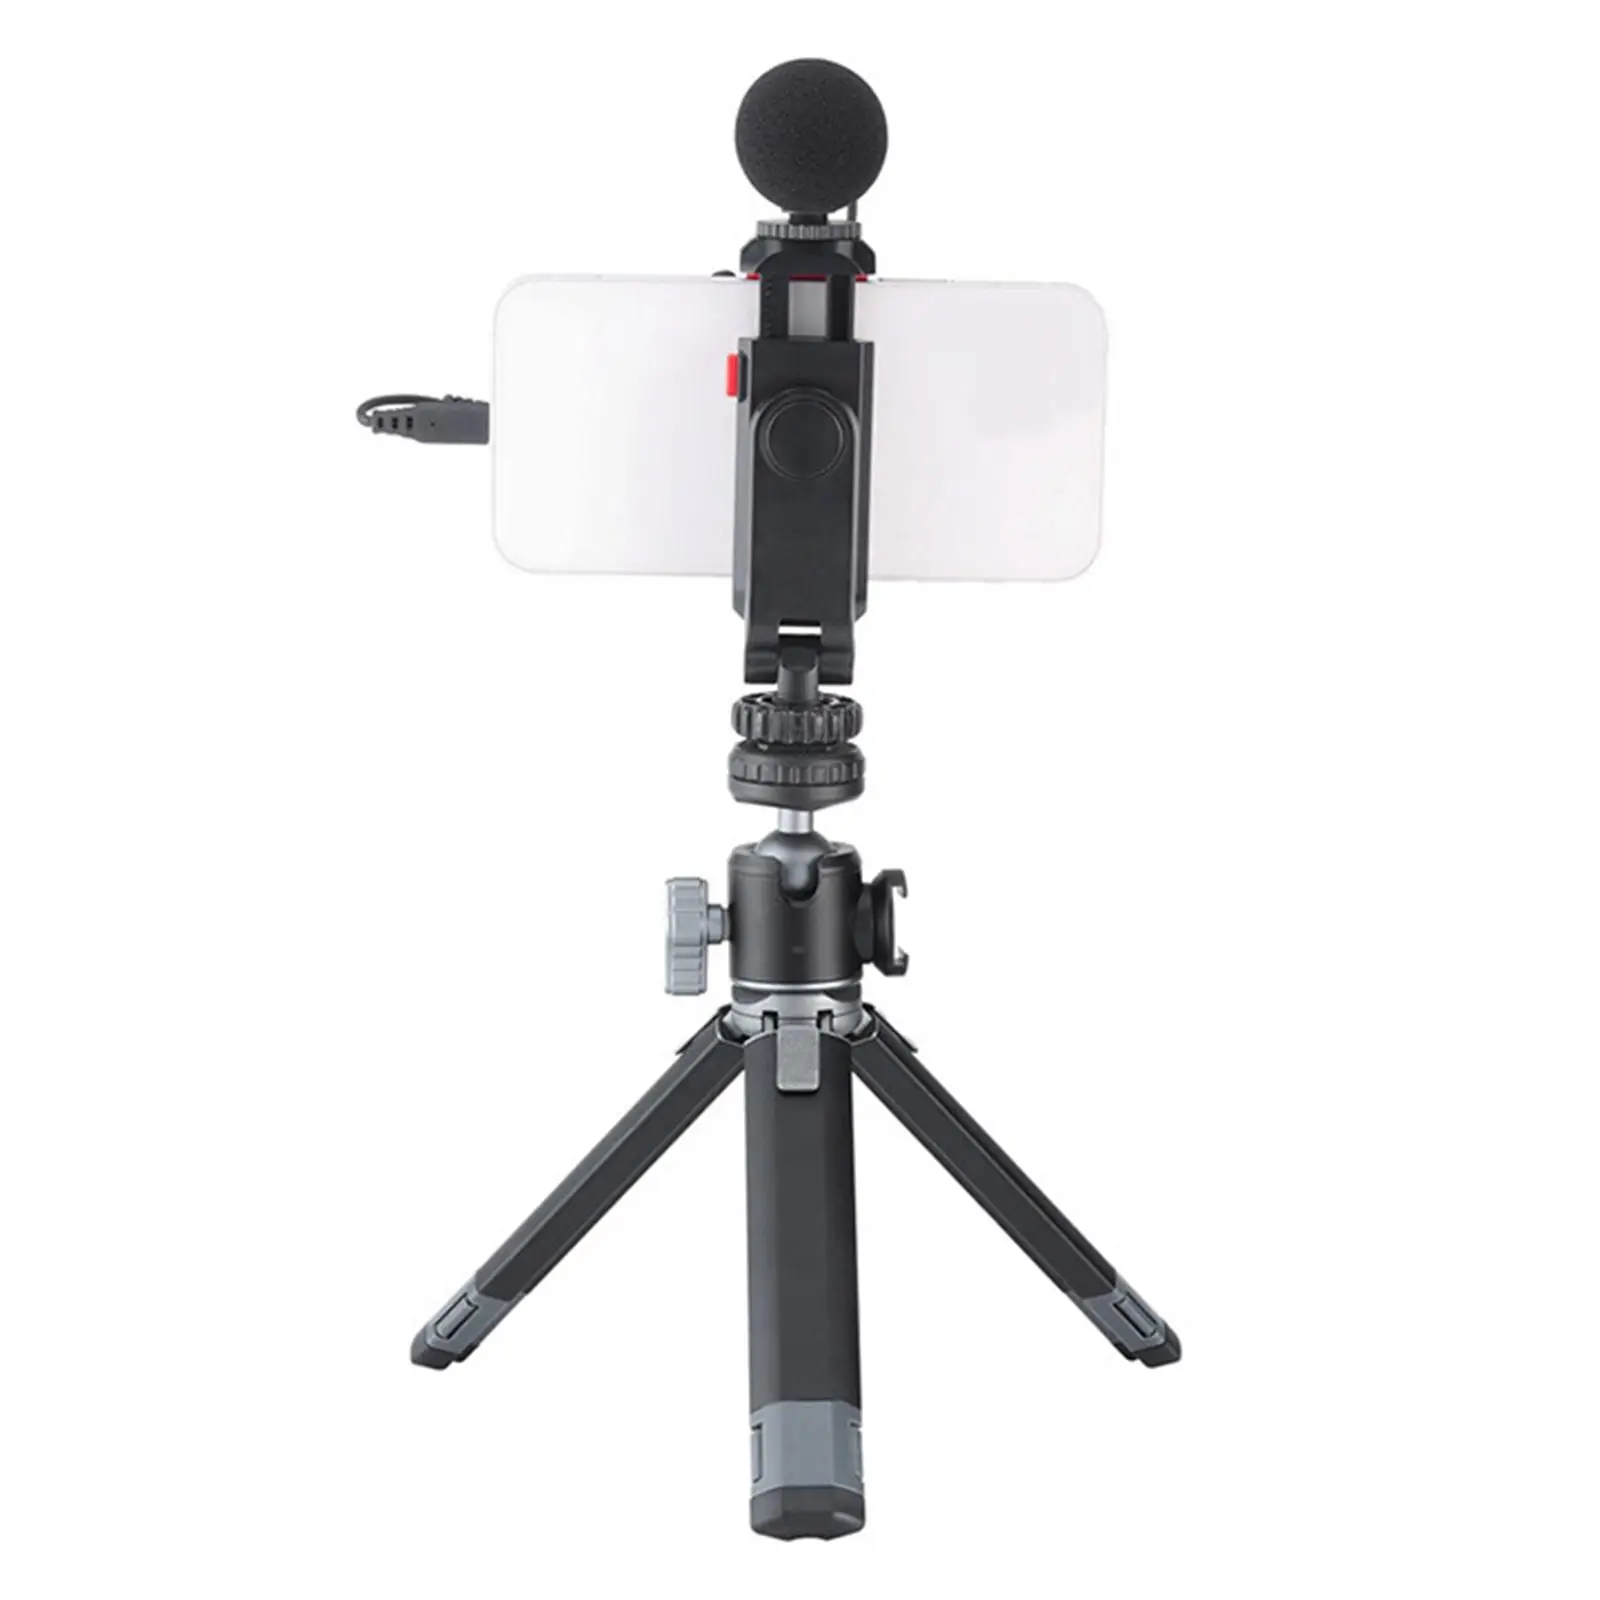 Phone Tripod Mount Adapter 360 Rotates with 2 Cold Shoe Universal Holder Stand   Live  Selfie Stick